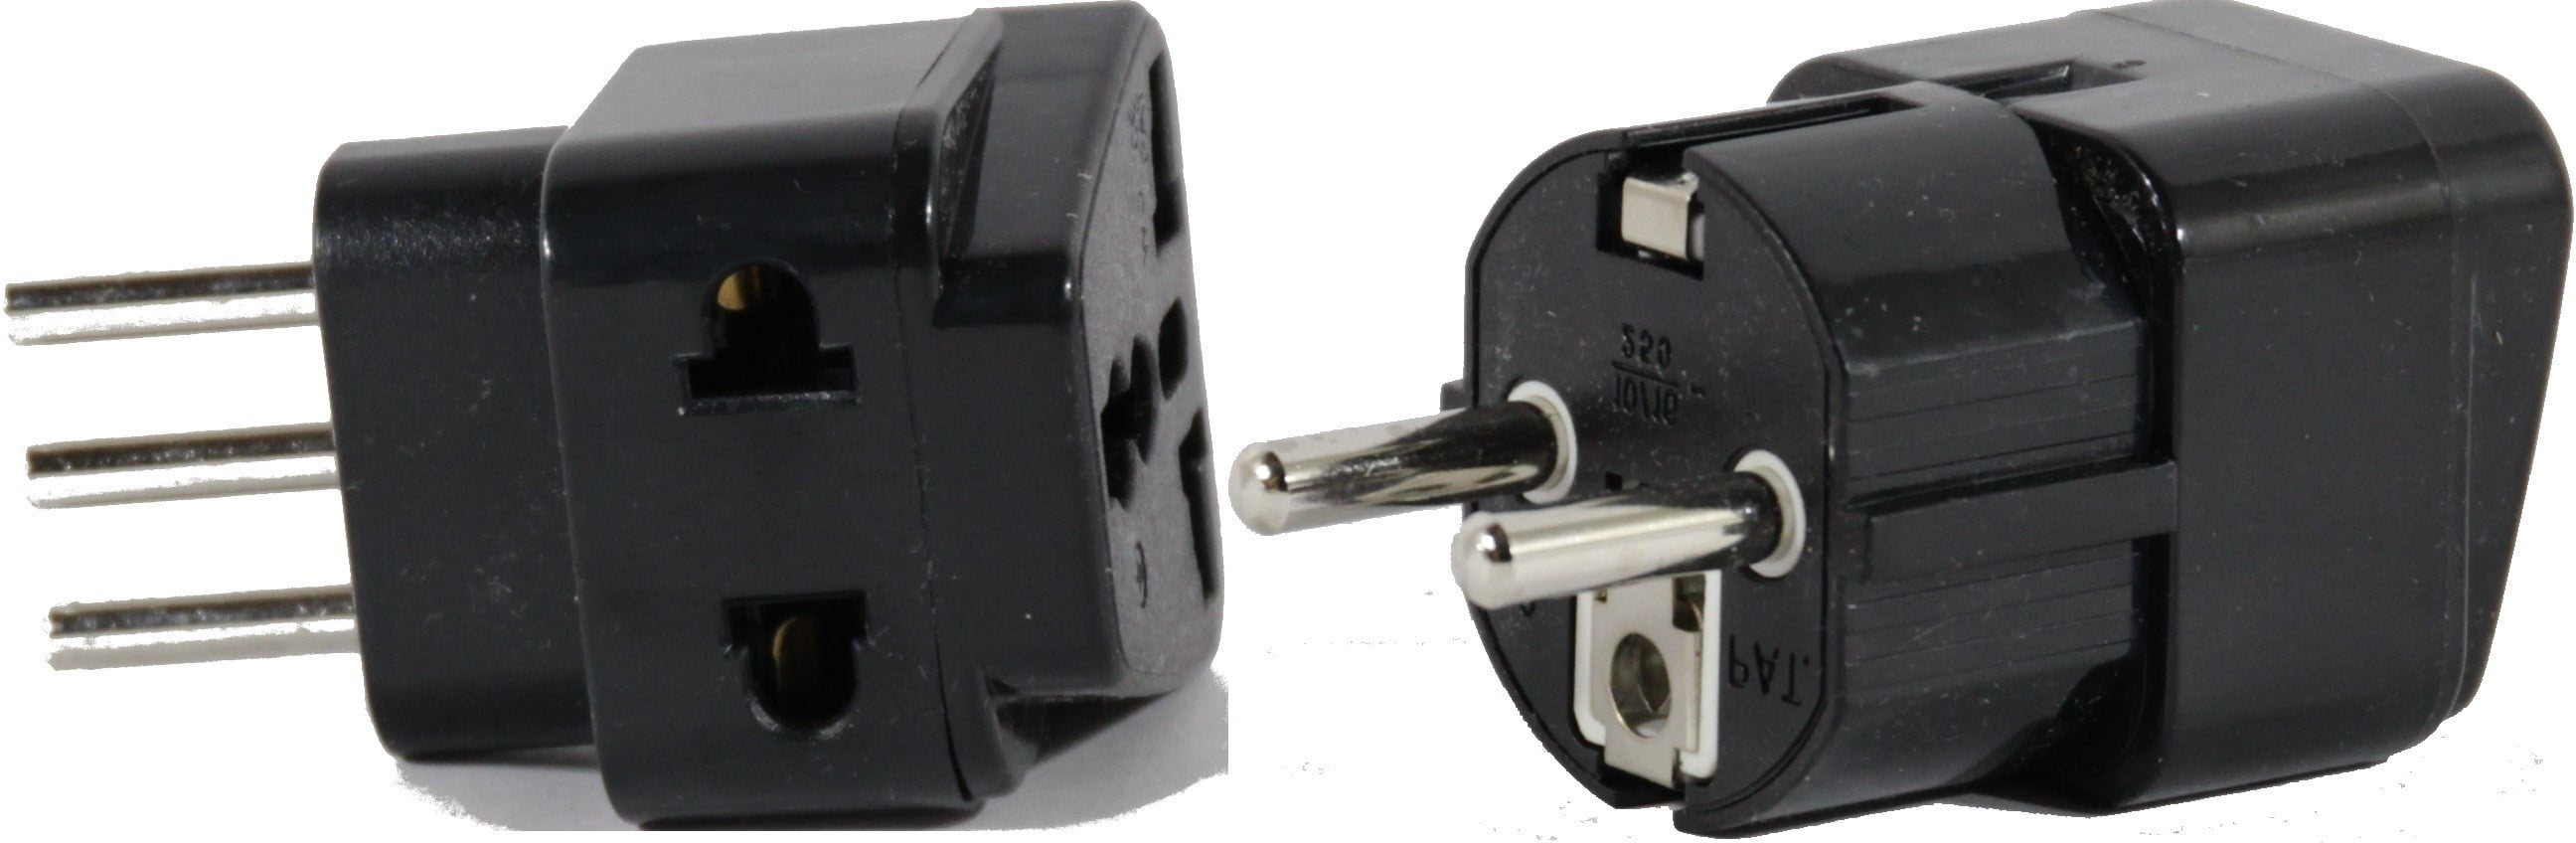 universal travel adapter for italy